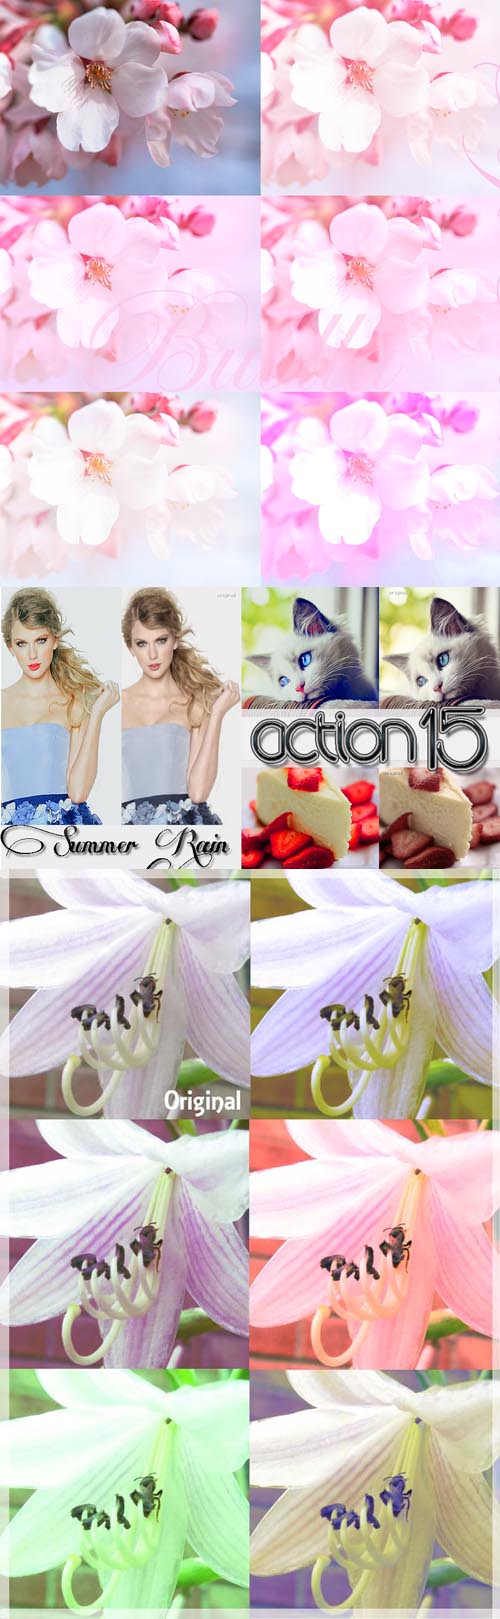 Photoshop Actions 2012 pack 527